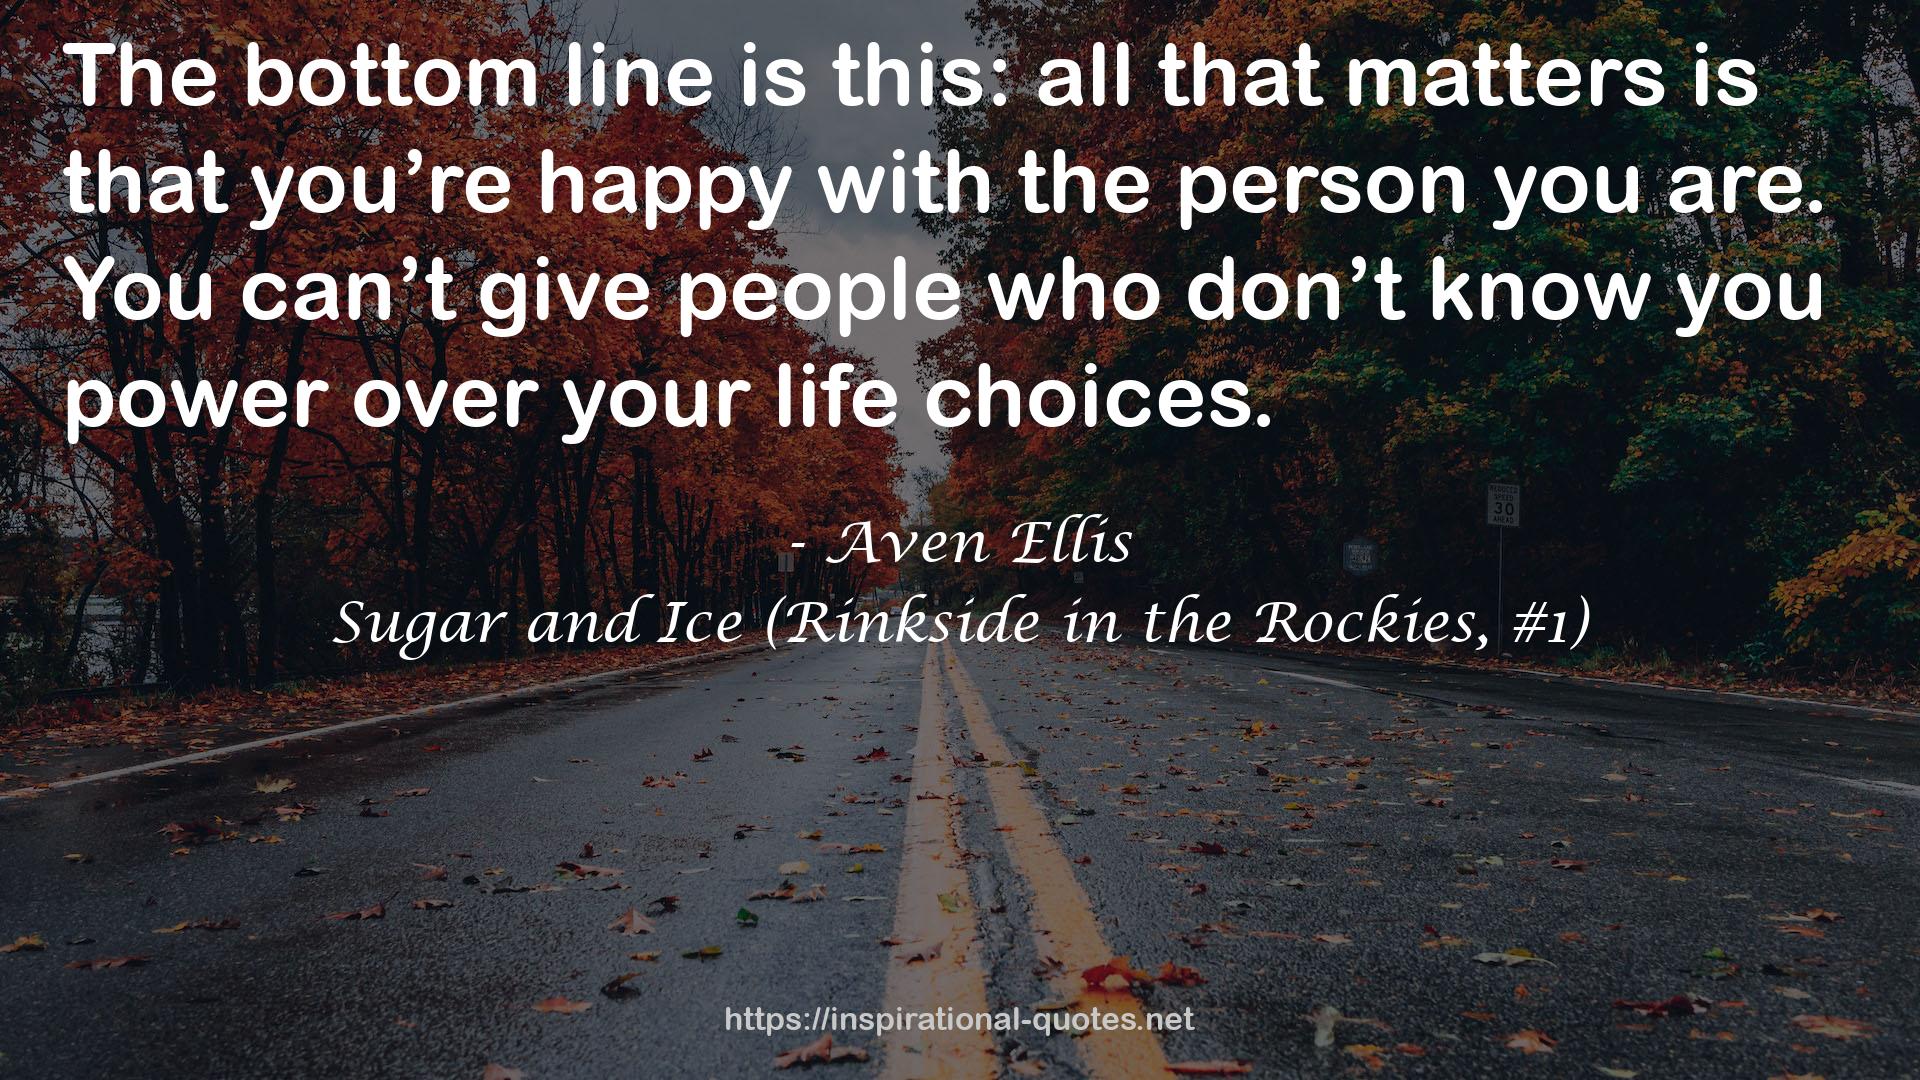 Sugar and Ice (Rinkside in the Rockies, #1) QUOTES